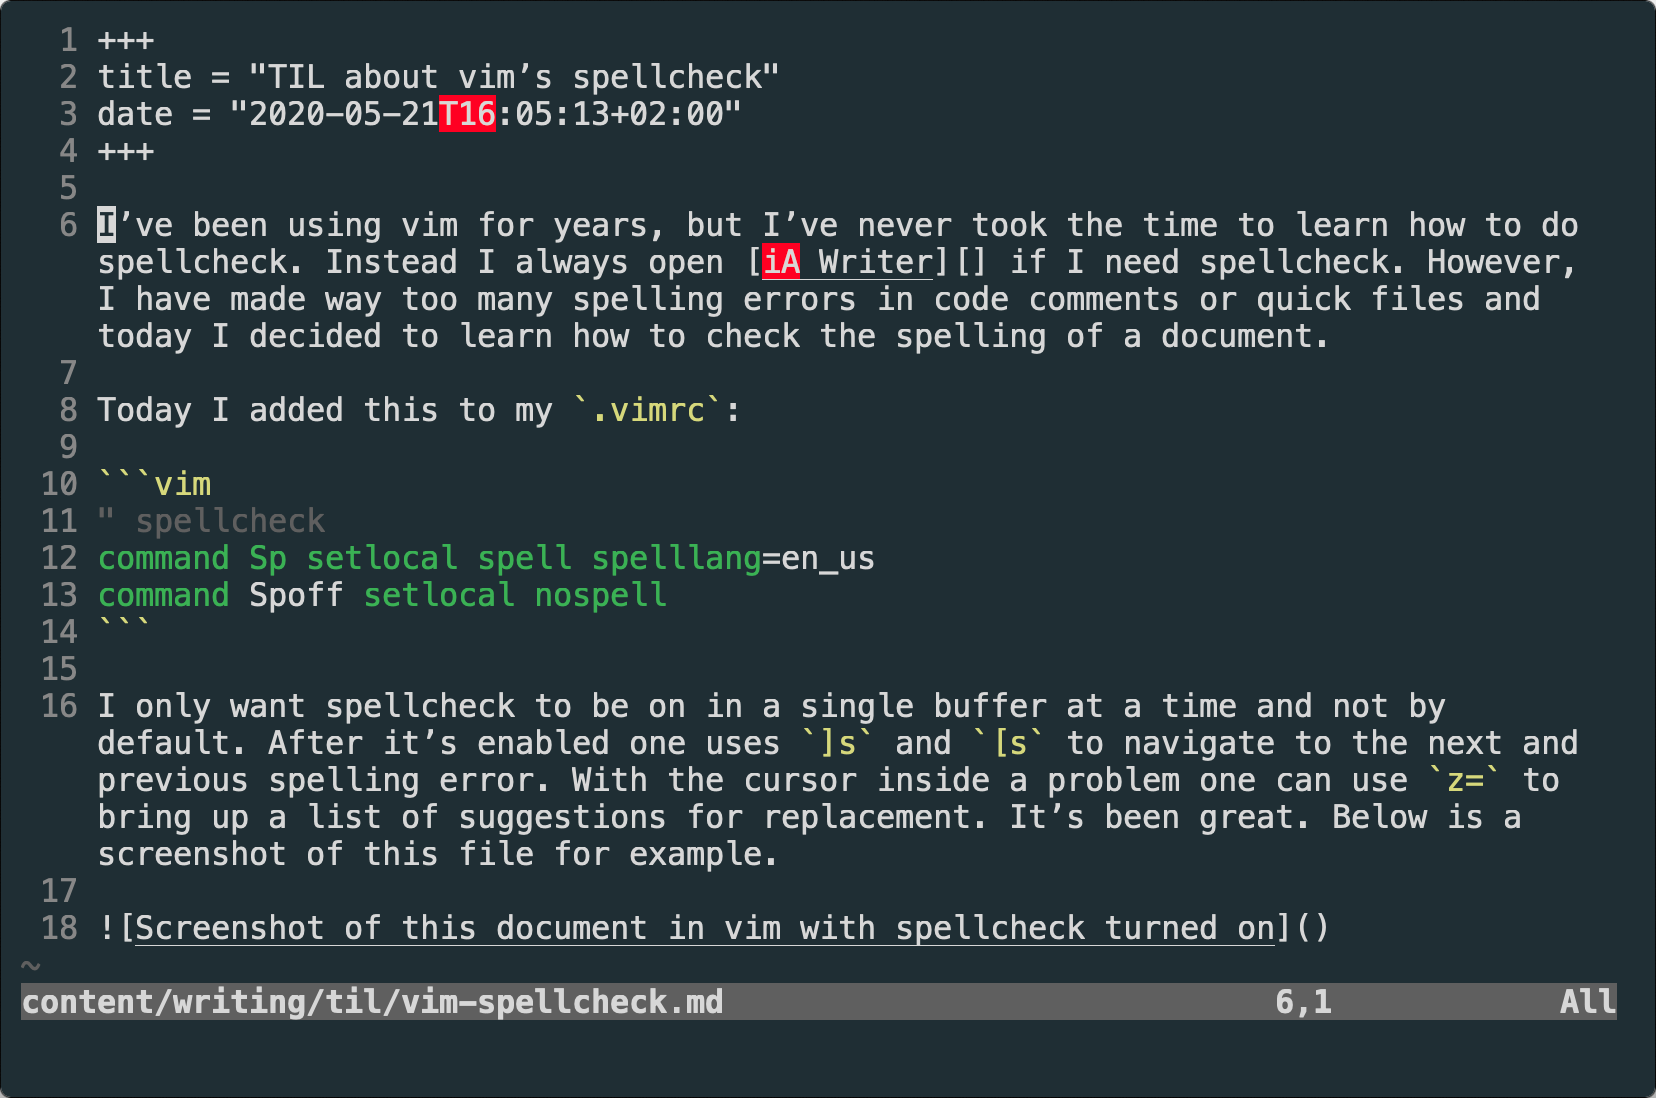 Screenshot of this document in vim with spellcheck turned on